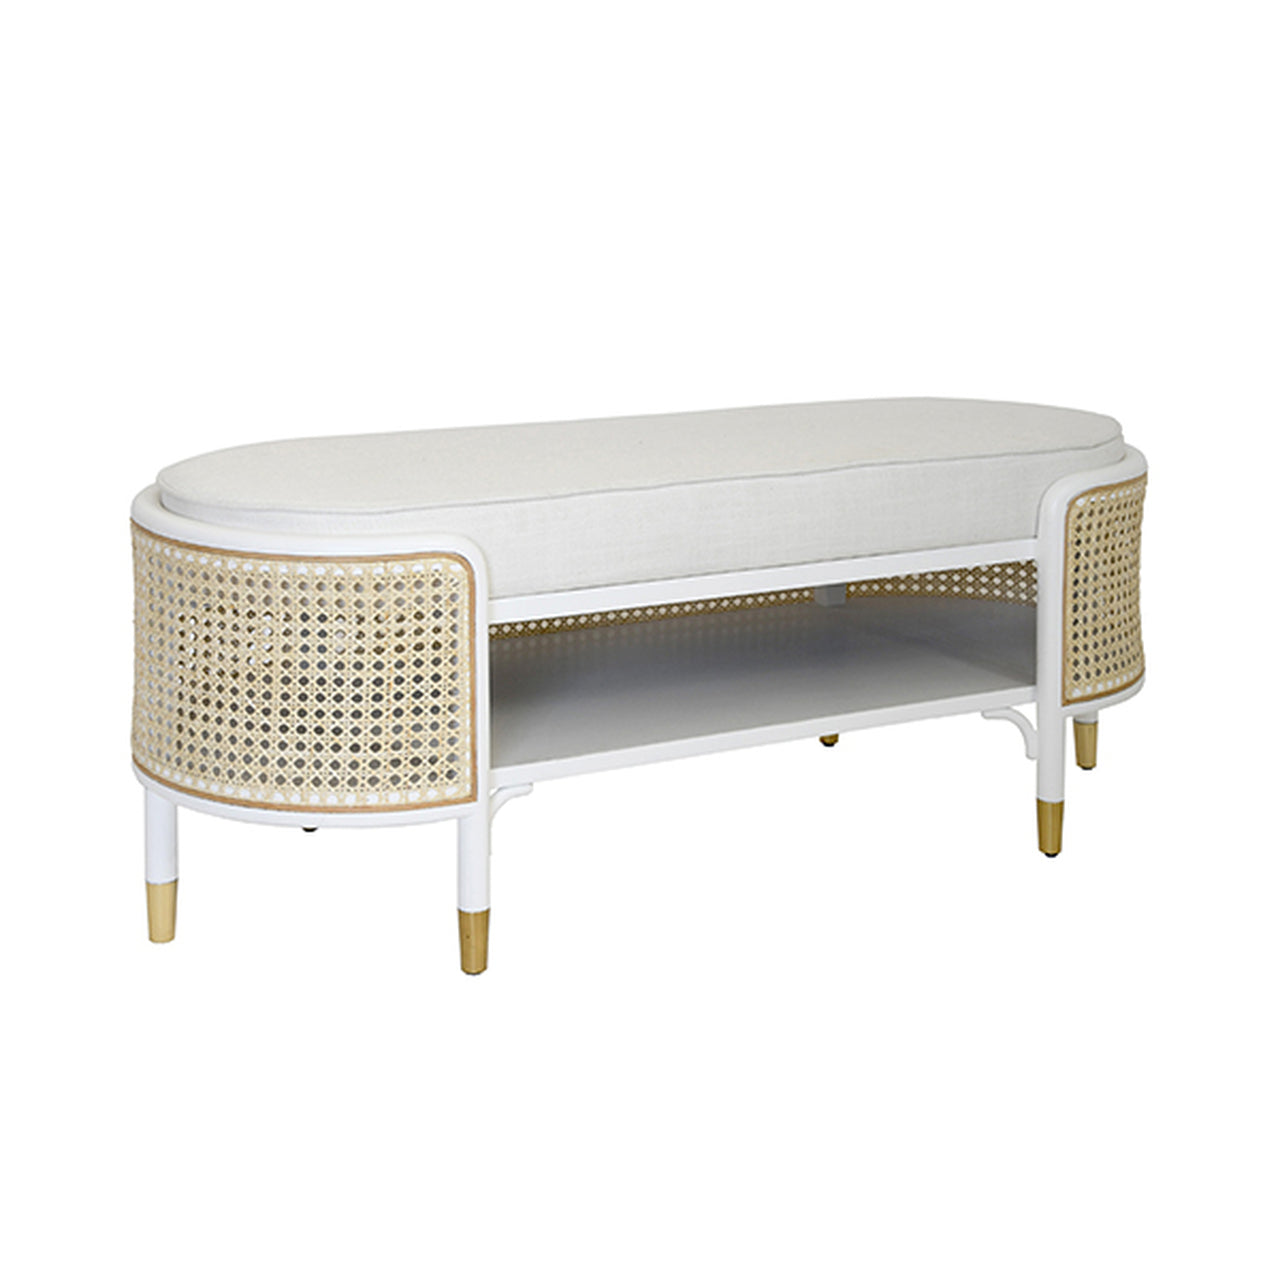 Elegant Cane Style Bench - Cane & Rattan Collection